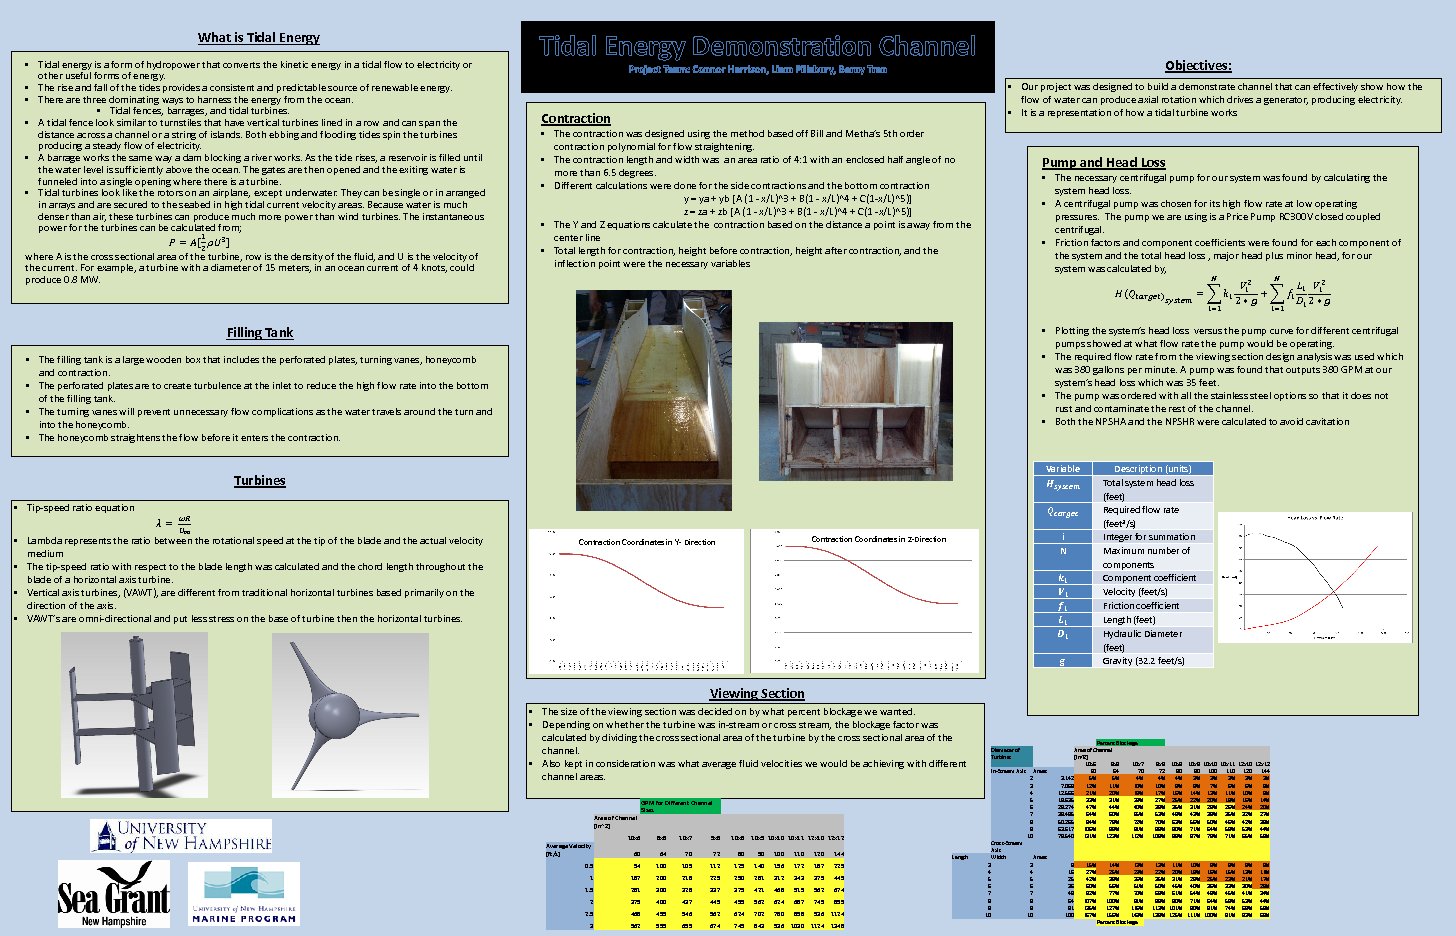 Tidal Energy Demonstration Channel by cbq27